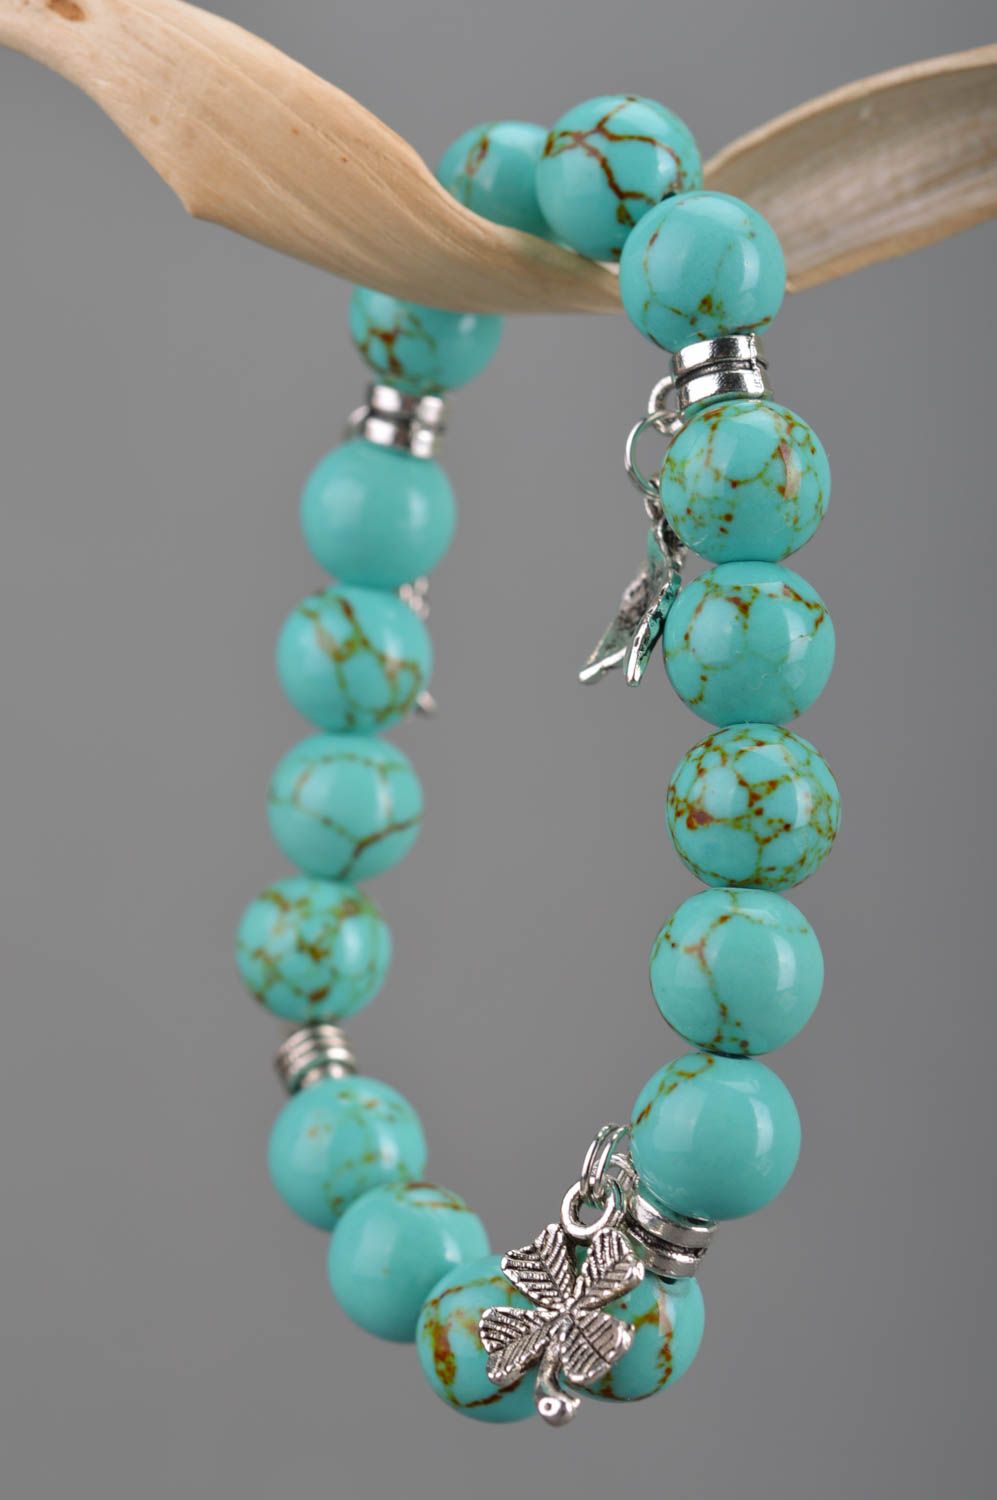 Handmade beaded wrist bracelet styled on turquoise with metal charms fish leaves photo 3